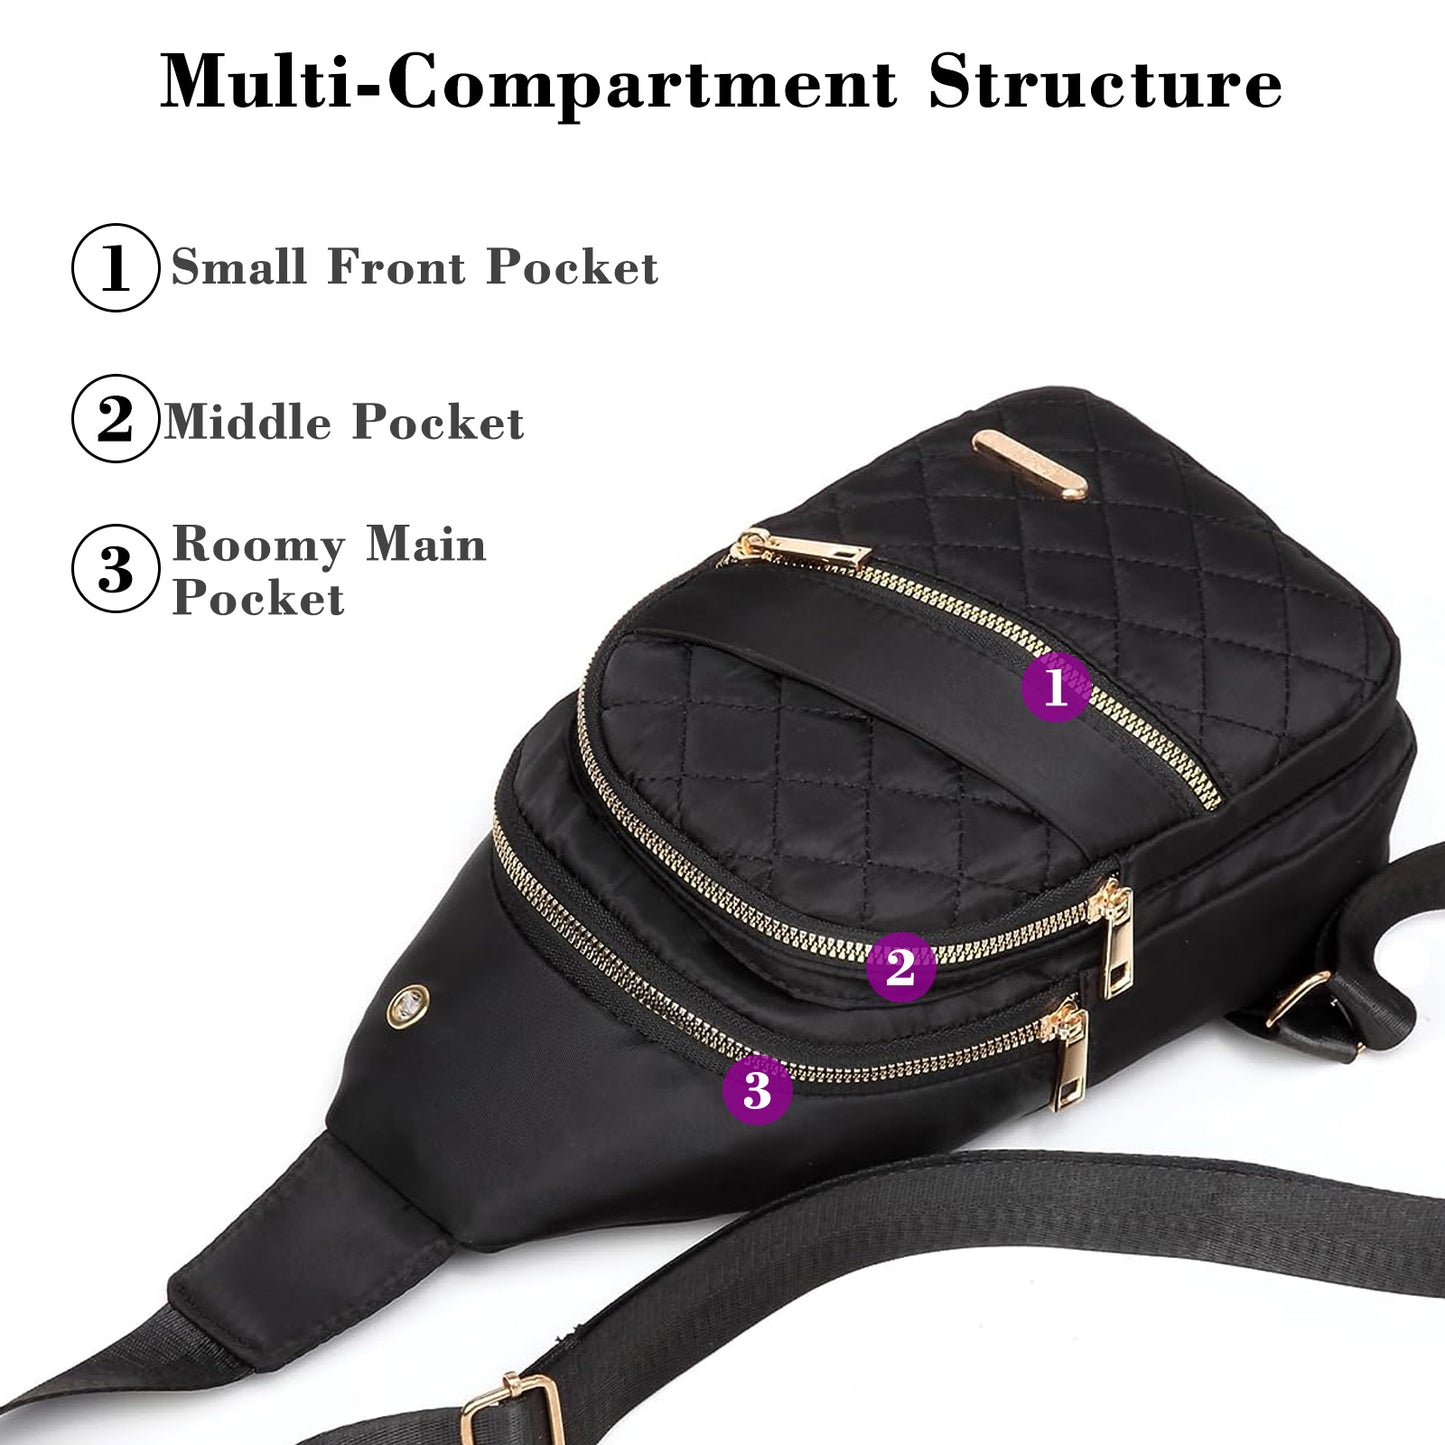 Versatile Crossbody Chest Bag - Water-Resistant Nylon, Adjustable Strap, Ideal for Travel, Work, and Daily Use(Black)